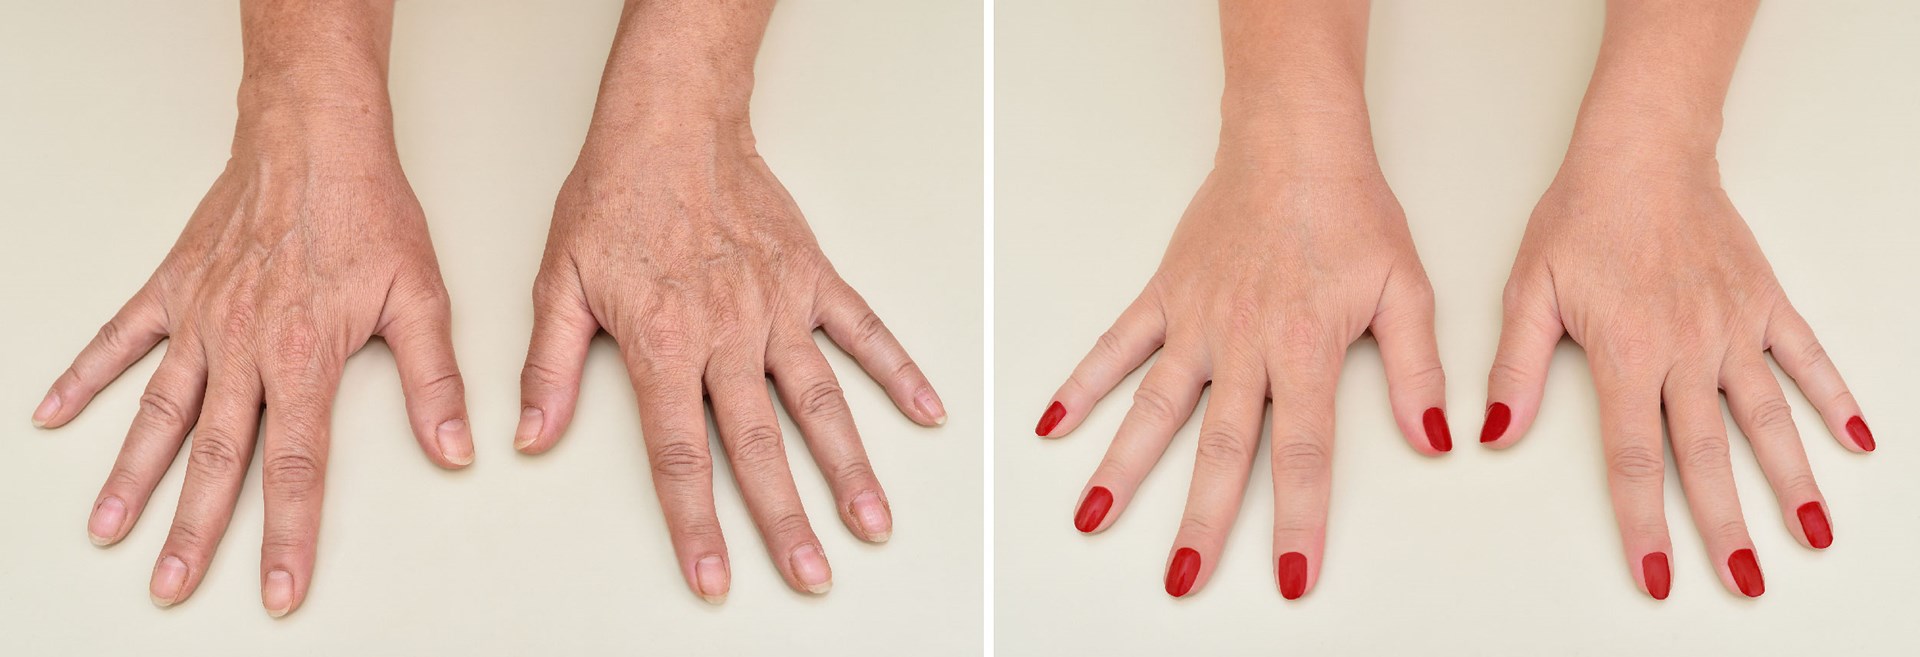 Hand Rejuvenation Before and After